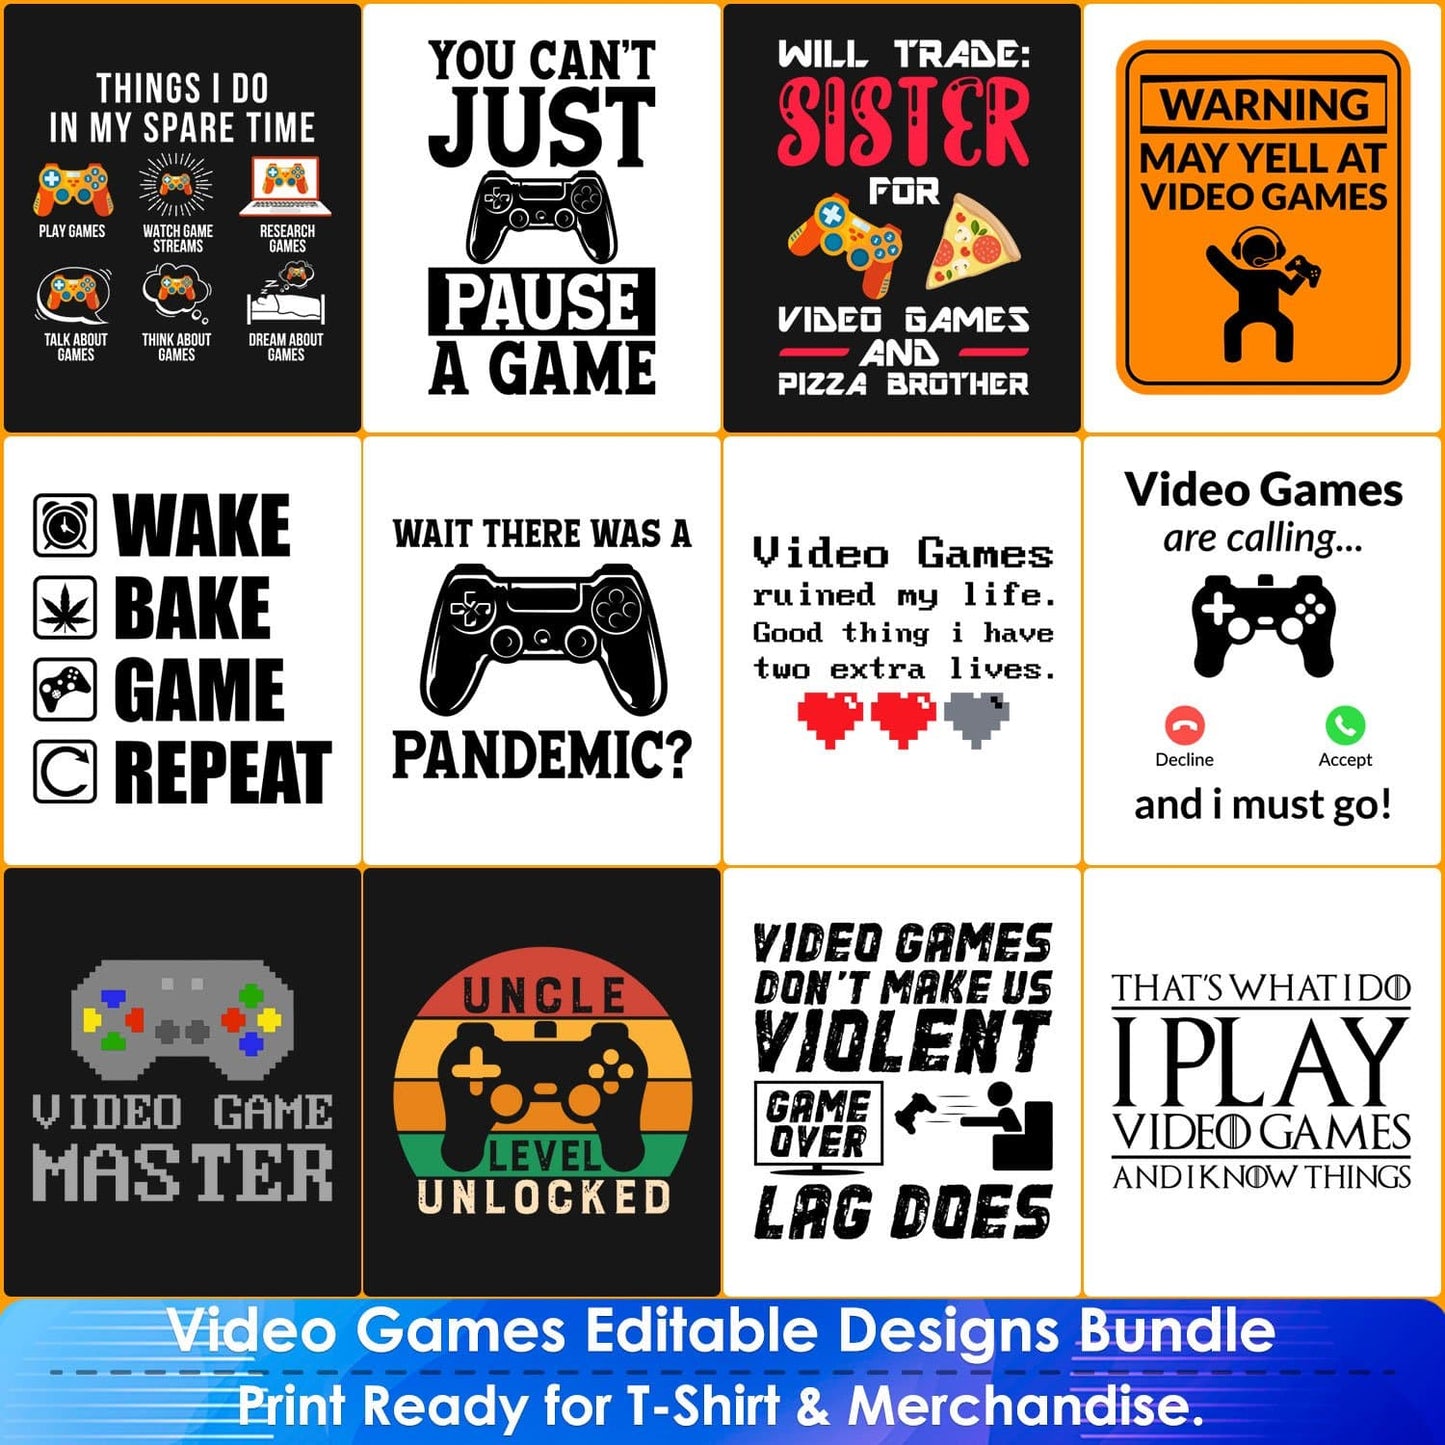 12 editable and scalable vector designs for gamer t shirts or gamer apparel